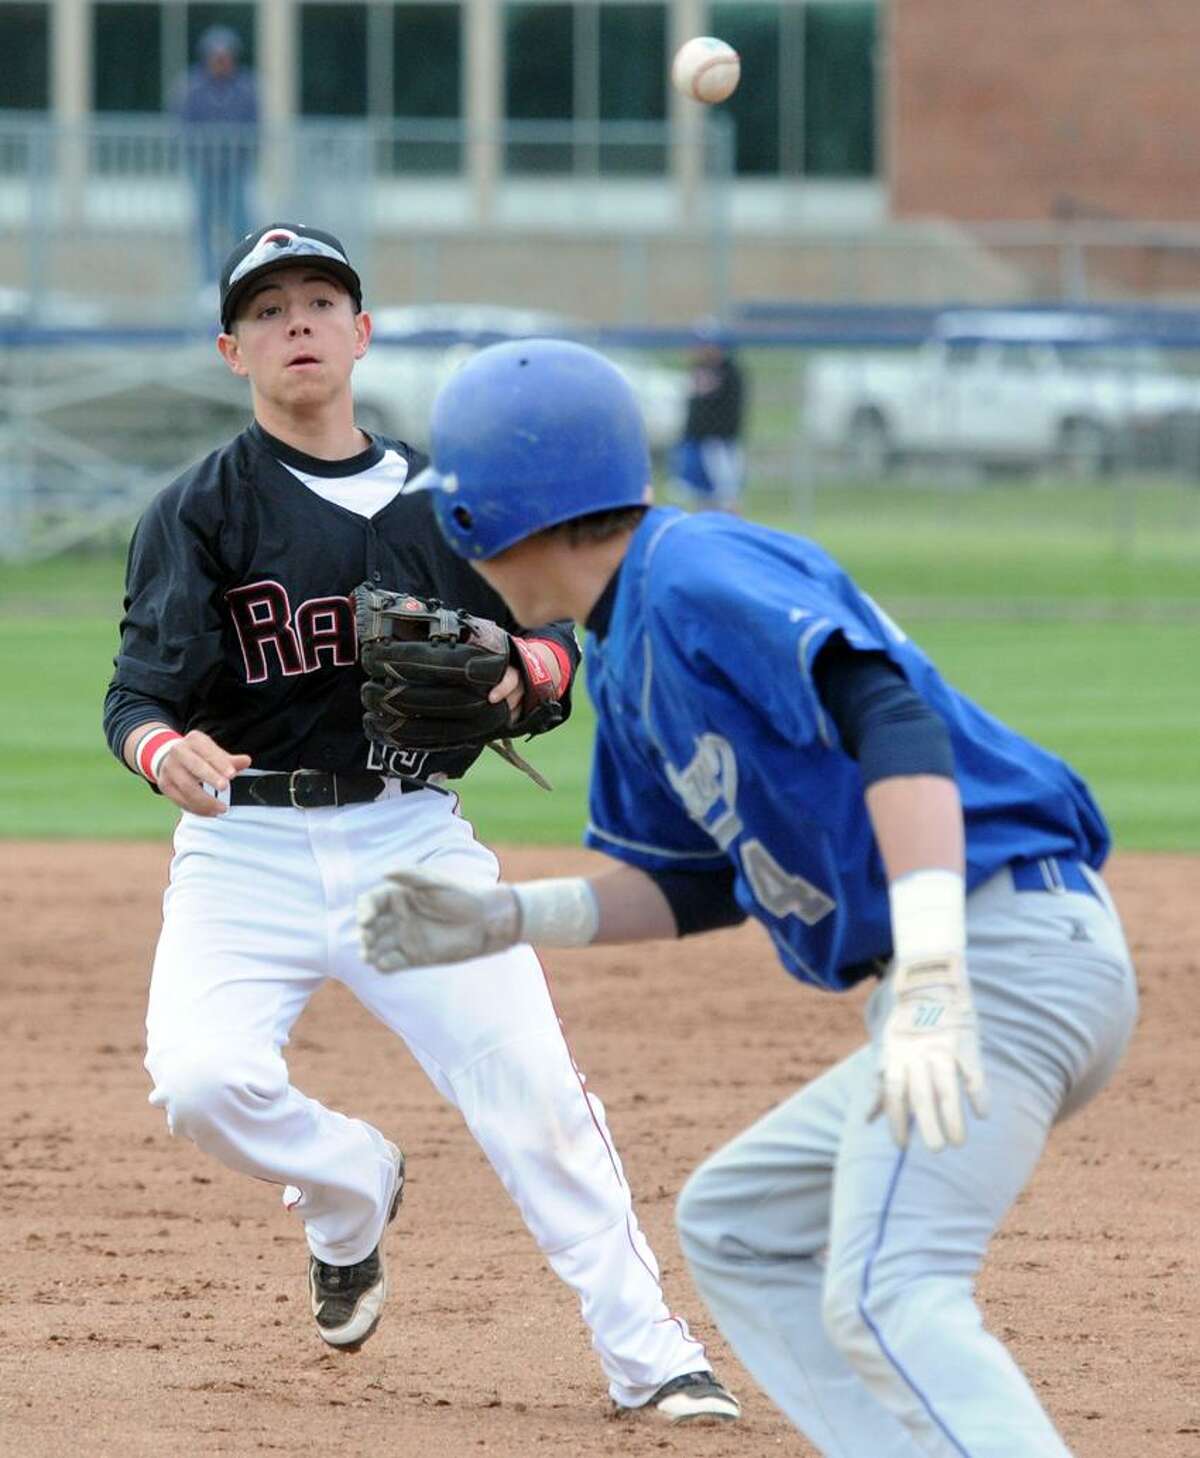 Cheshire's Tommy Savino, left, West Haven's Mike Brand caught in a rundown between 2nd and 1st base. West Haven won 2-1 in 8 innings. Mara Lavitt/New Haven Register mlavitt@newhavenregister.com